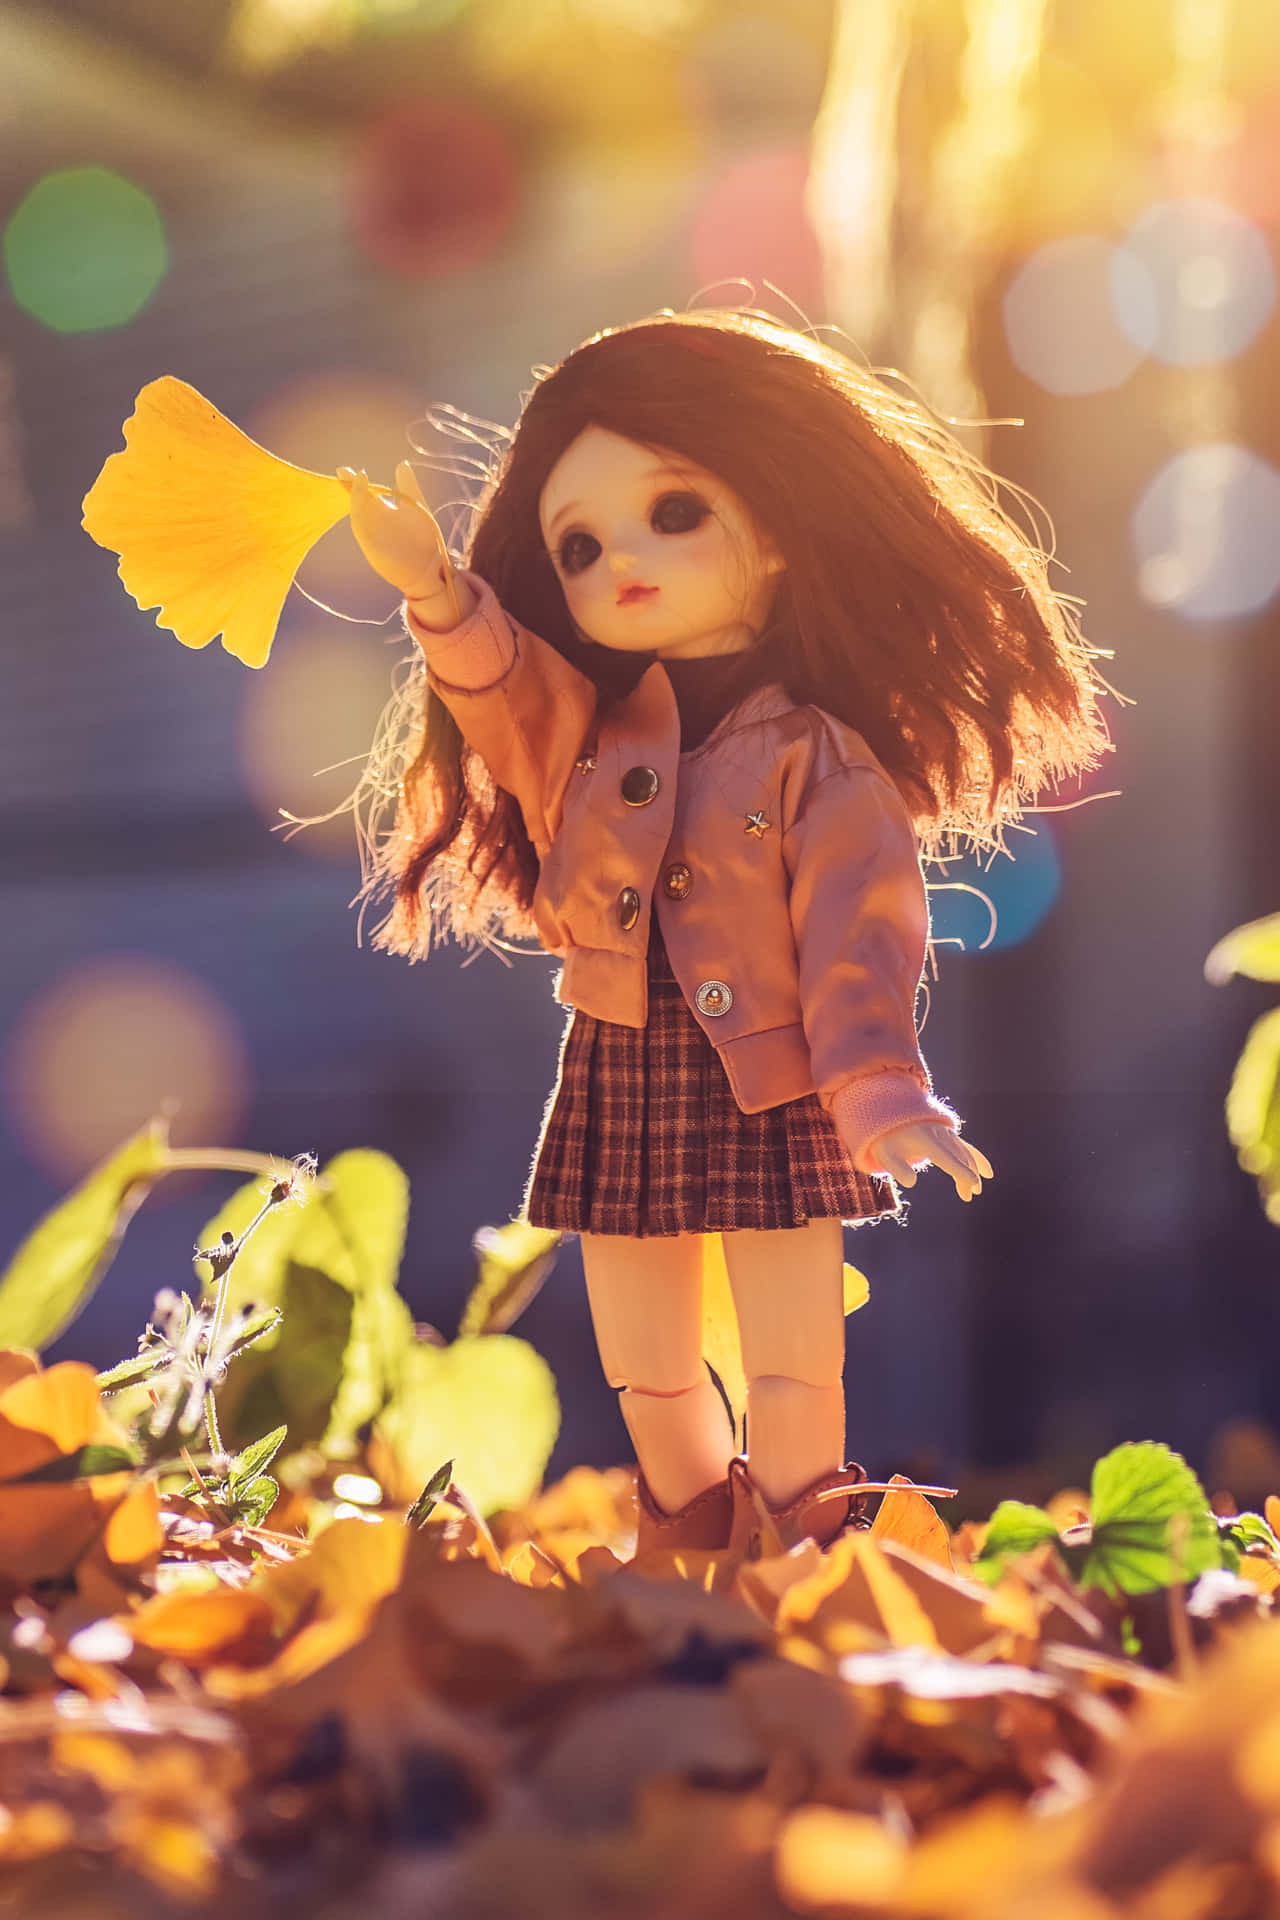 A Doll Is Standing In The Leaves With A Yellow Flower